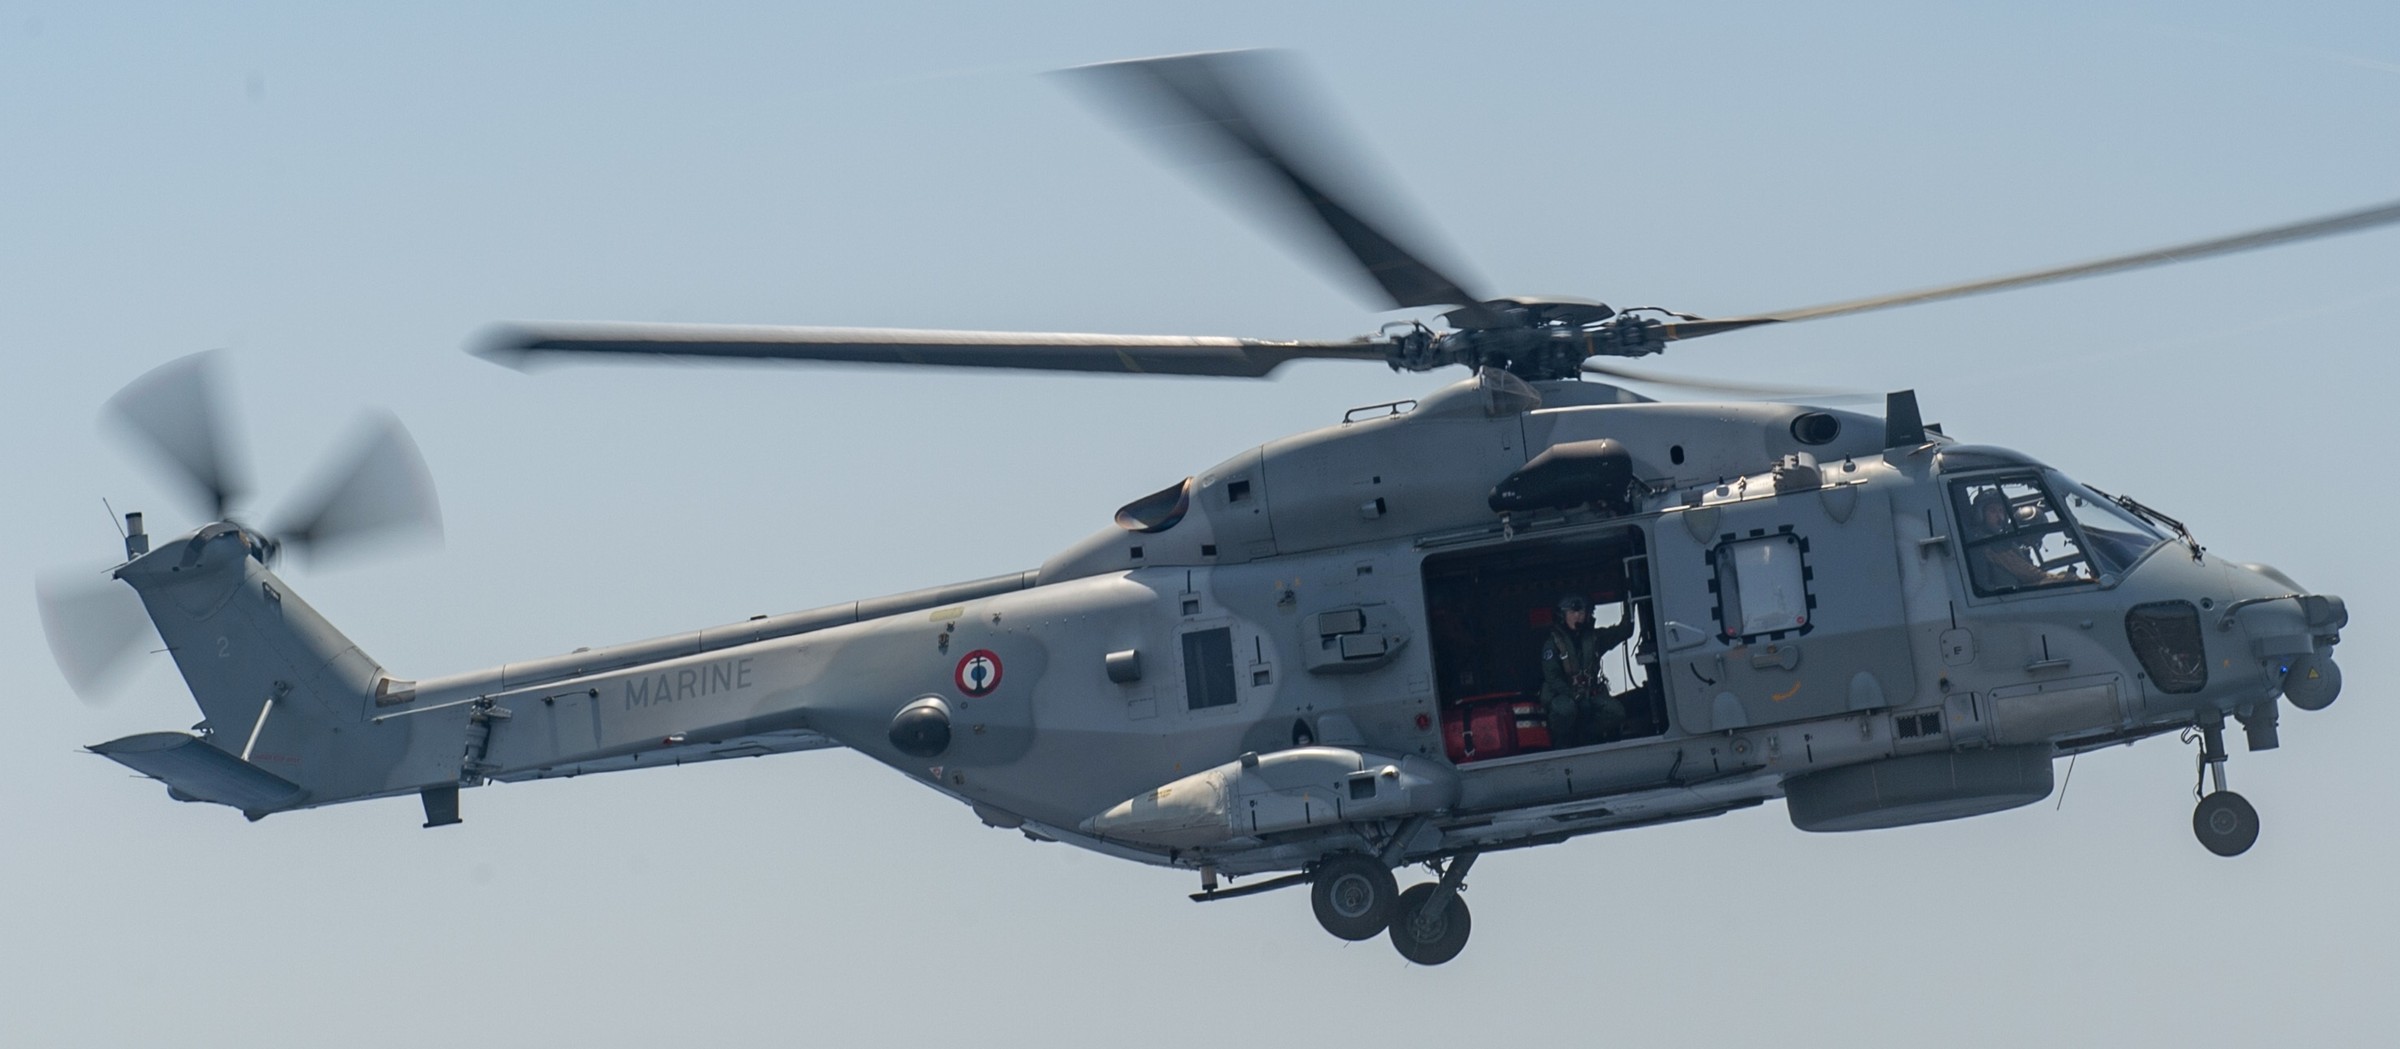 nh90 caiman nfh helicopter french navy marine nationale aeronavale flottille 31f 33f 45